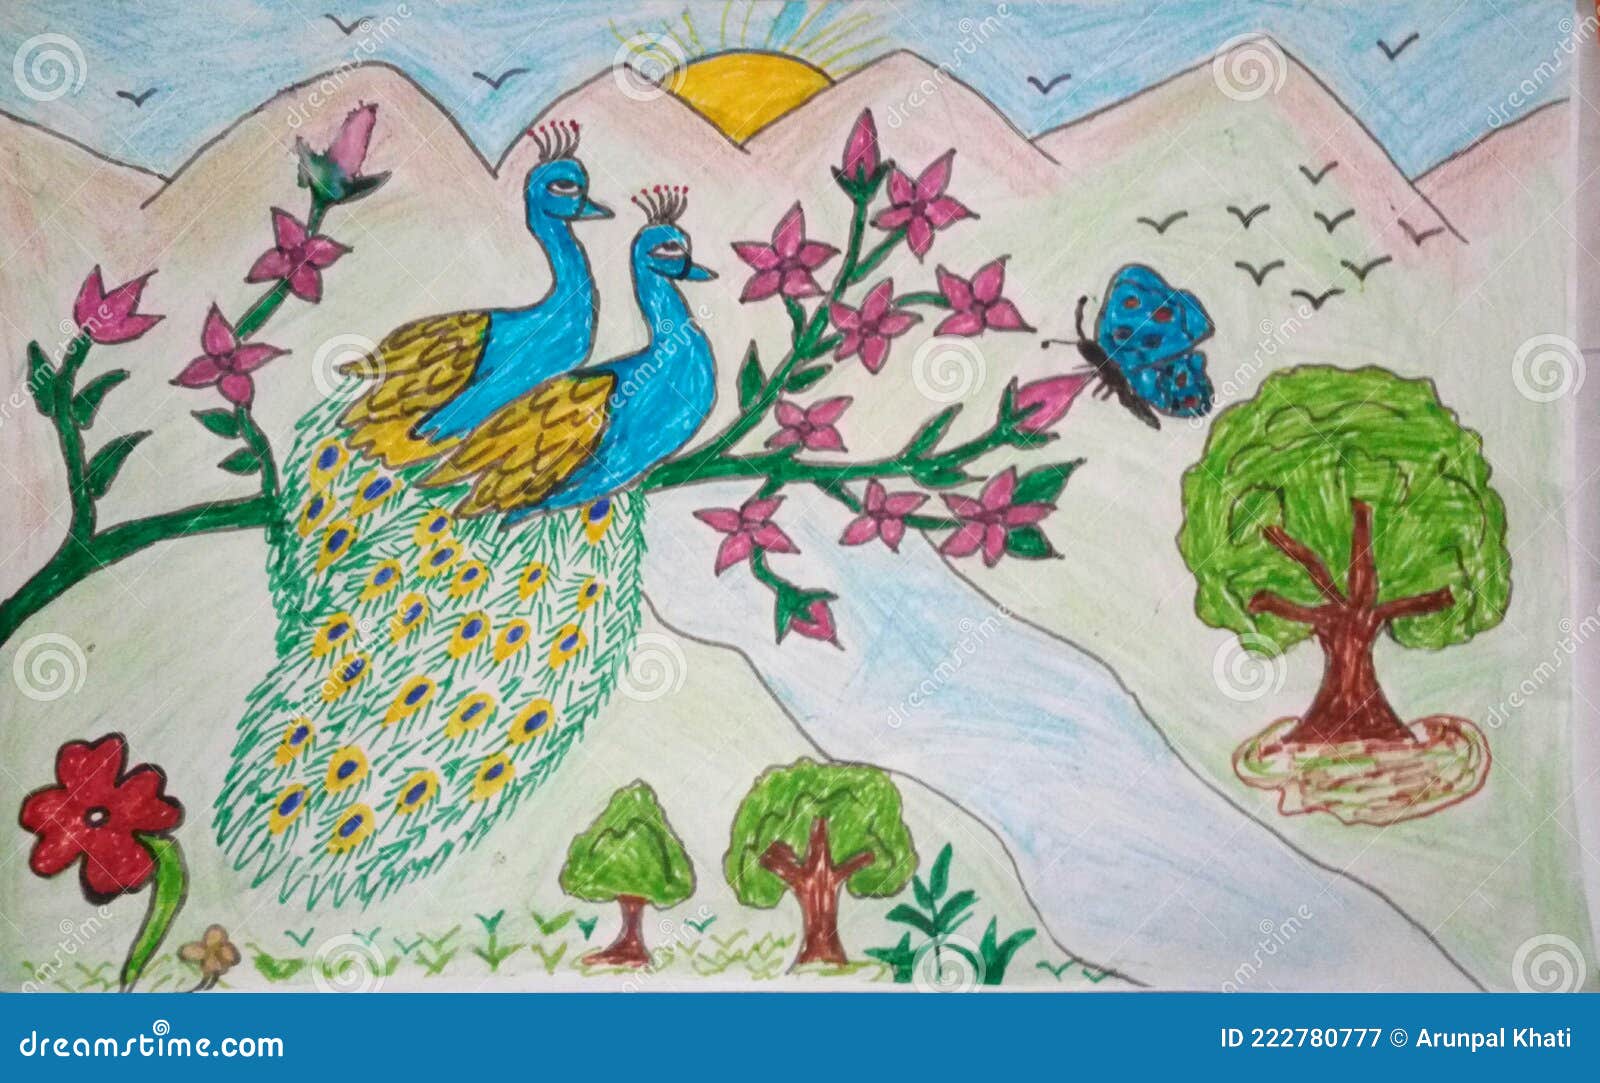 Art Projects for Kids - Learn how to draw a peacock with its feathers on  full display. The shapes are simple so students of all ages can enjoy  drawing one. https://artprojectsforkids.org/draw-a-peacock/ #howtodraw #